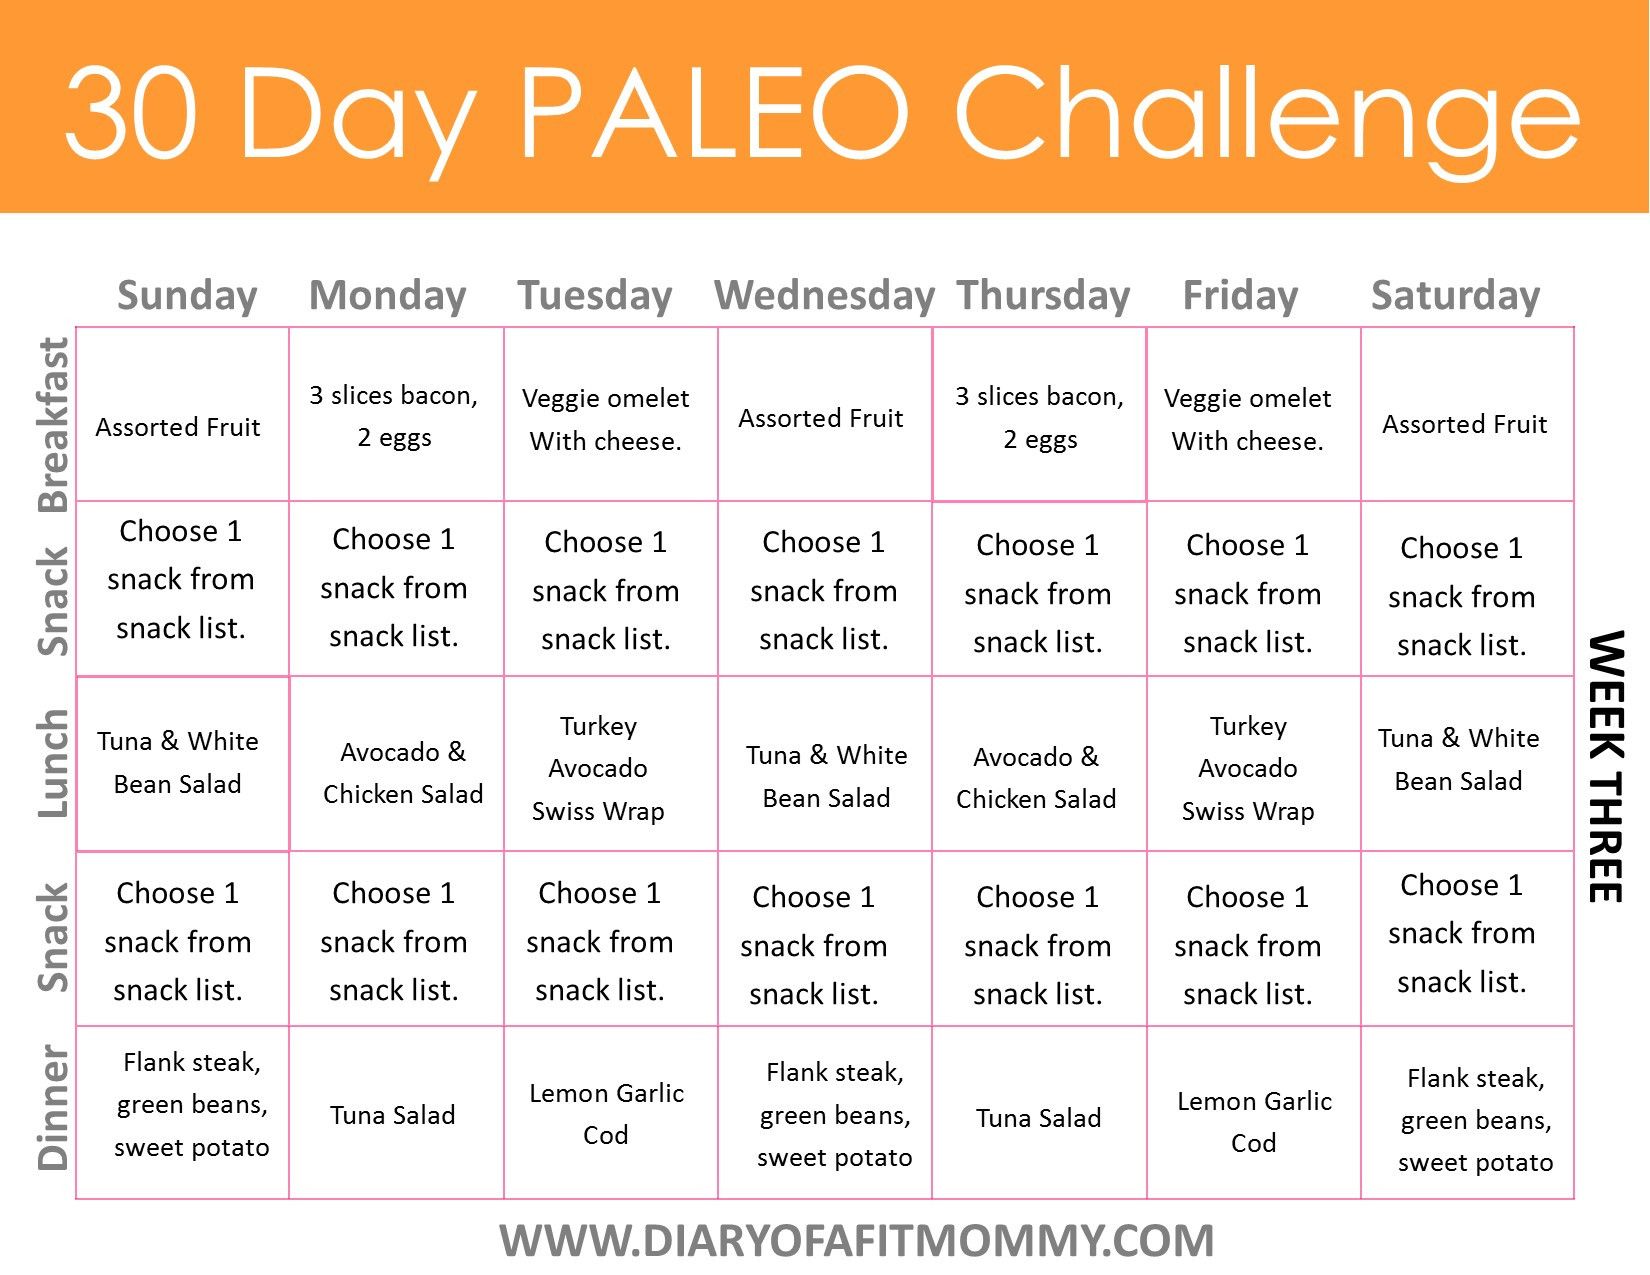 30 Day Paleo Diet Plan
 Diary of a Fit Mommy30 Day Paleo Challenge Diary of a